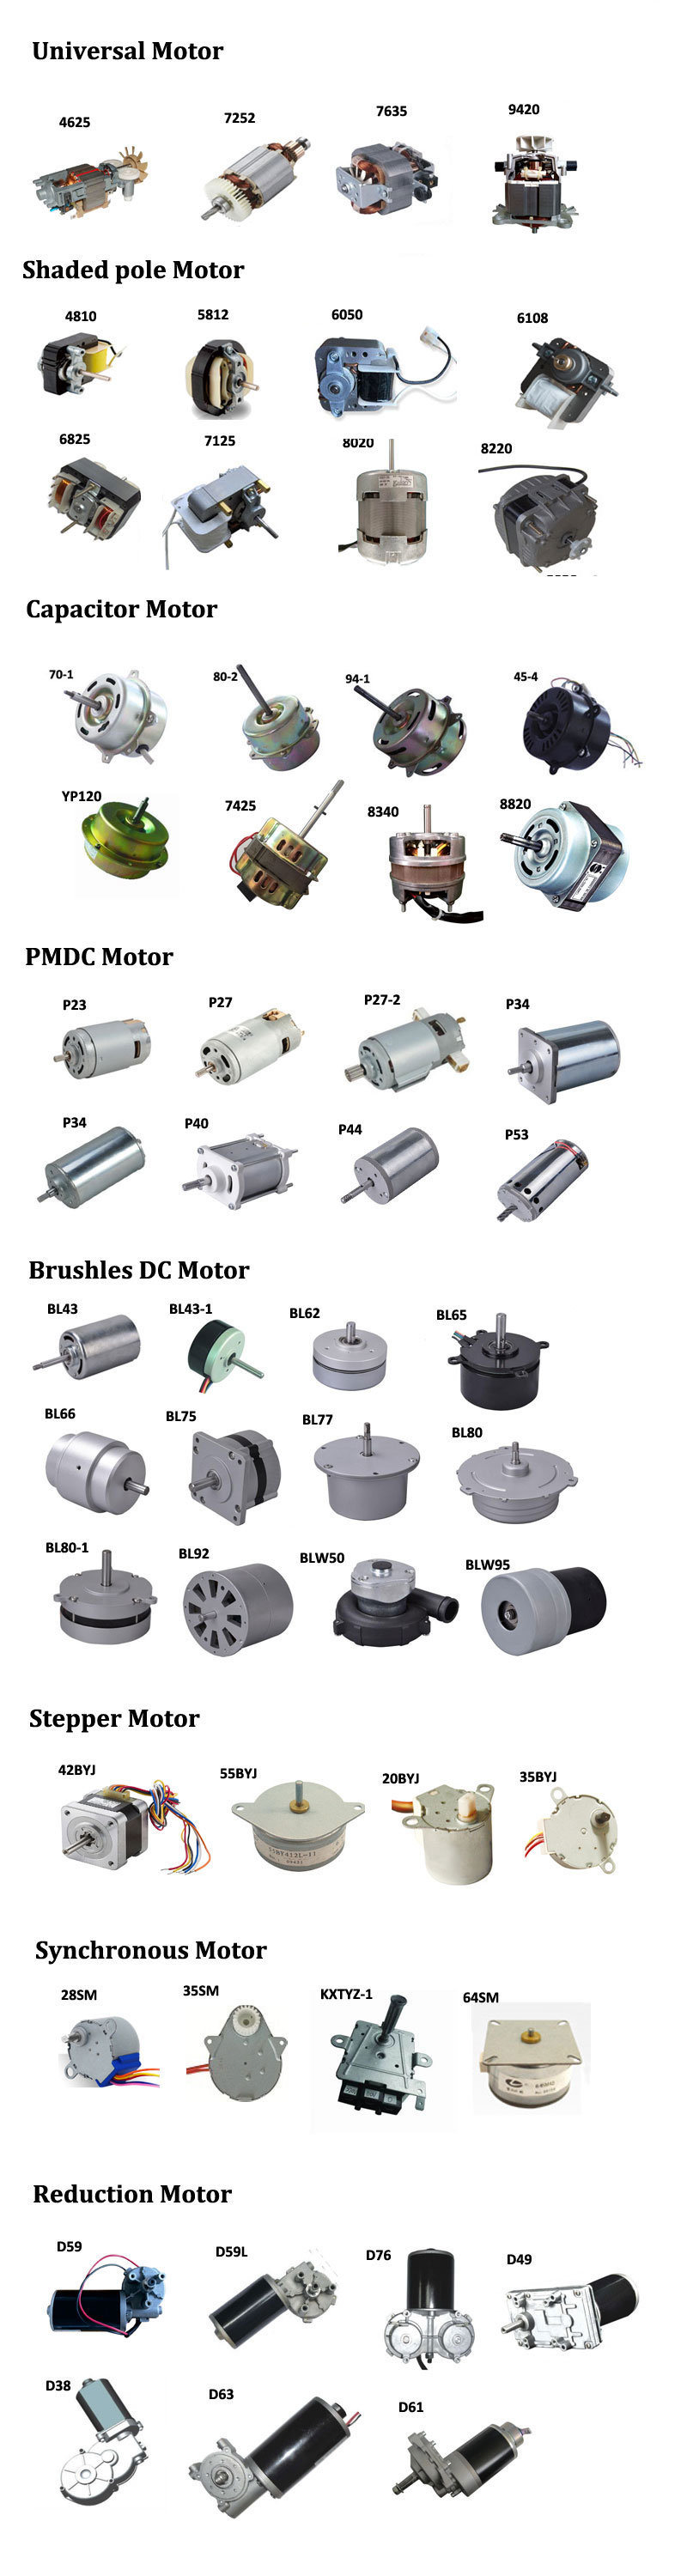 Electrical AC Single-Phase Capacitor Motor for Air Conditioner/Bathroom Ventilation Fans Motor